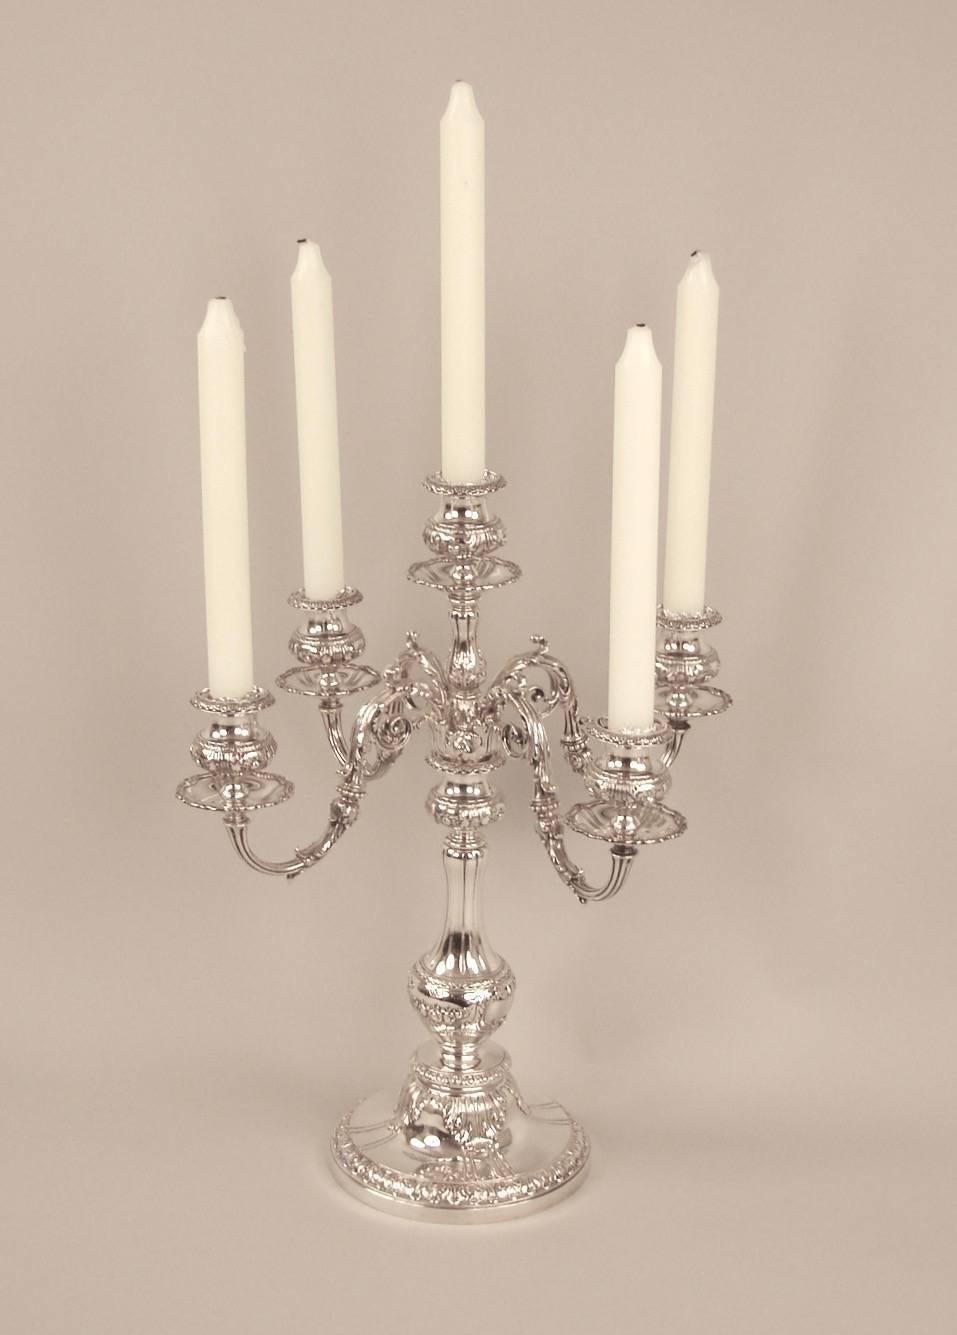 An impressive pair of early 2oth century Gorham sterling silver convertible five-light candelabra in the Renaissance Revival style, each mounted with scrolling supports and accented with sculpted and hammered acanthus leaves, raised on circular